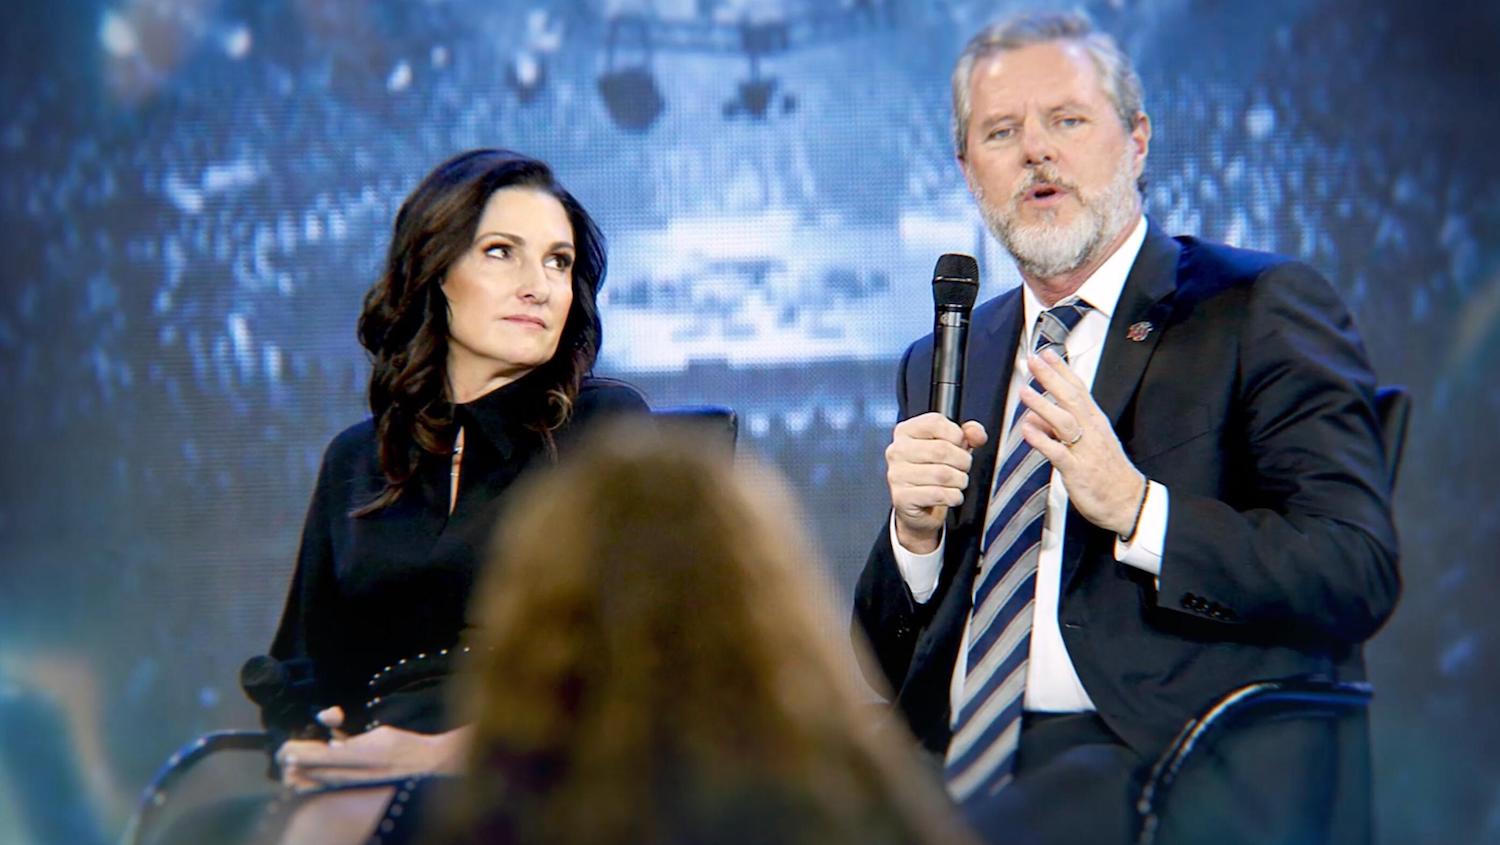 'God Forbid: The Sex Scandal That Brought Down A Dynasty' production still shows Becki Falwell sitting next to Jerry Falwell Jr. while he holds a microphone on stage.